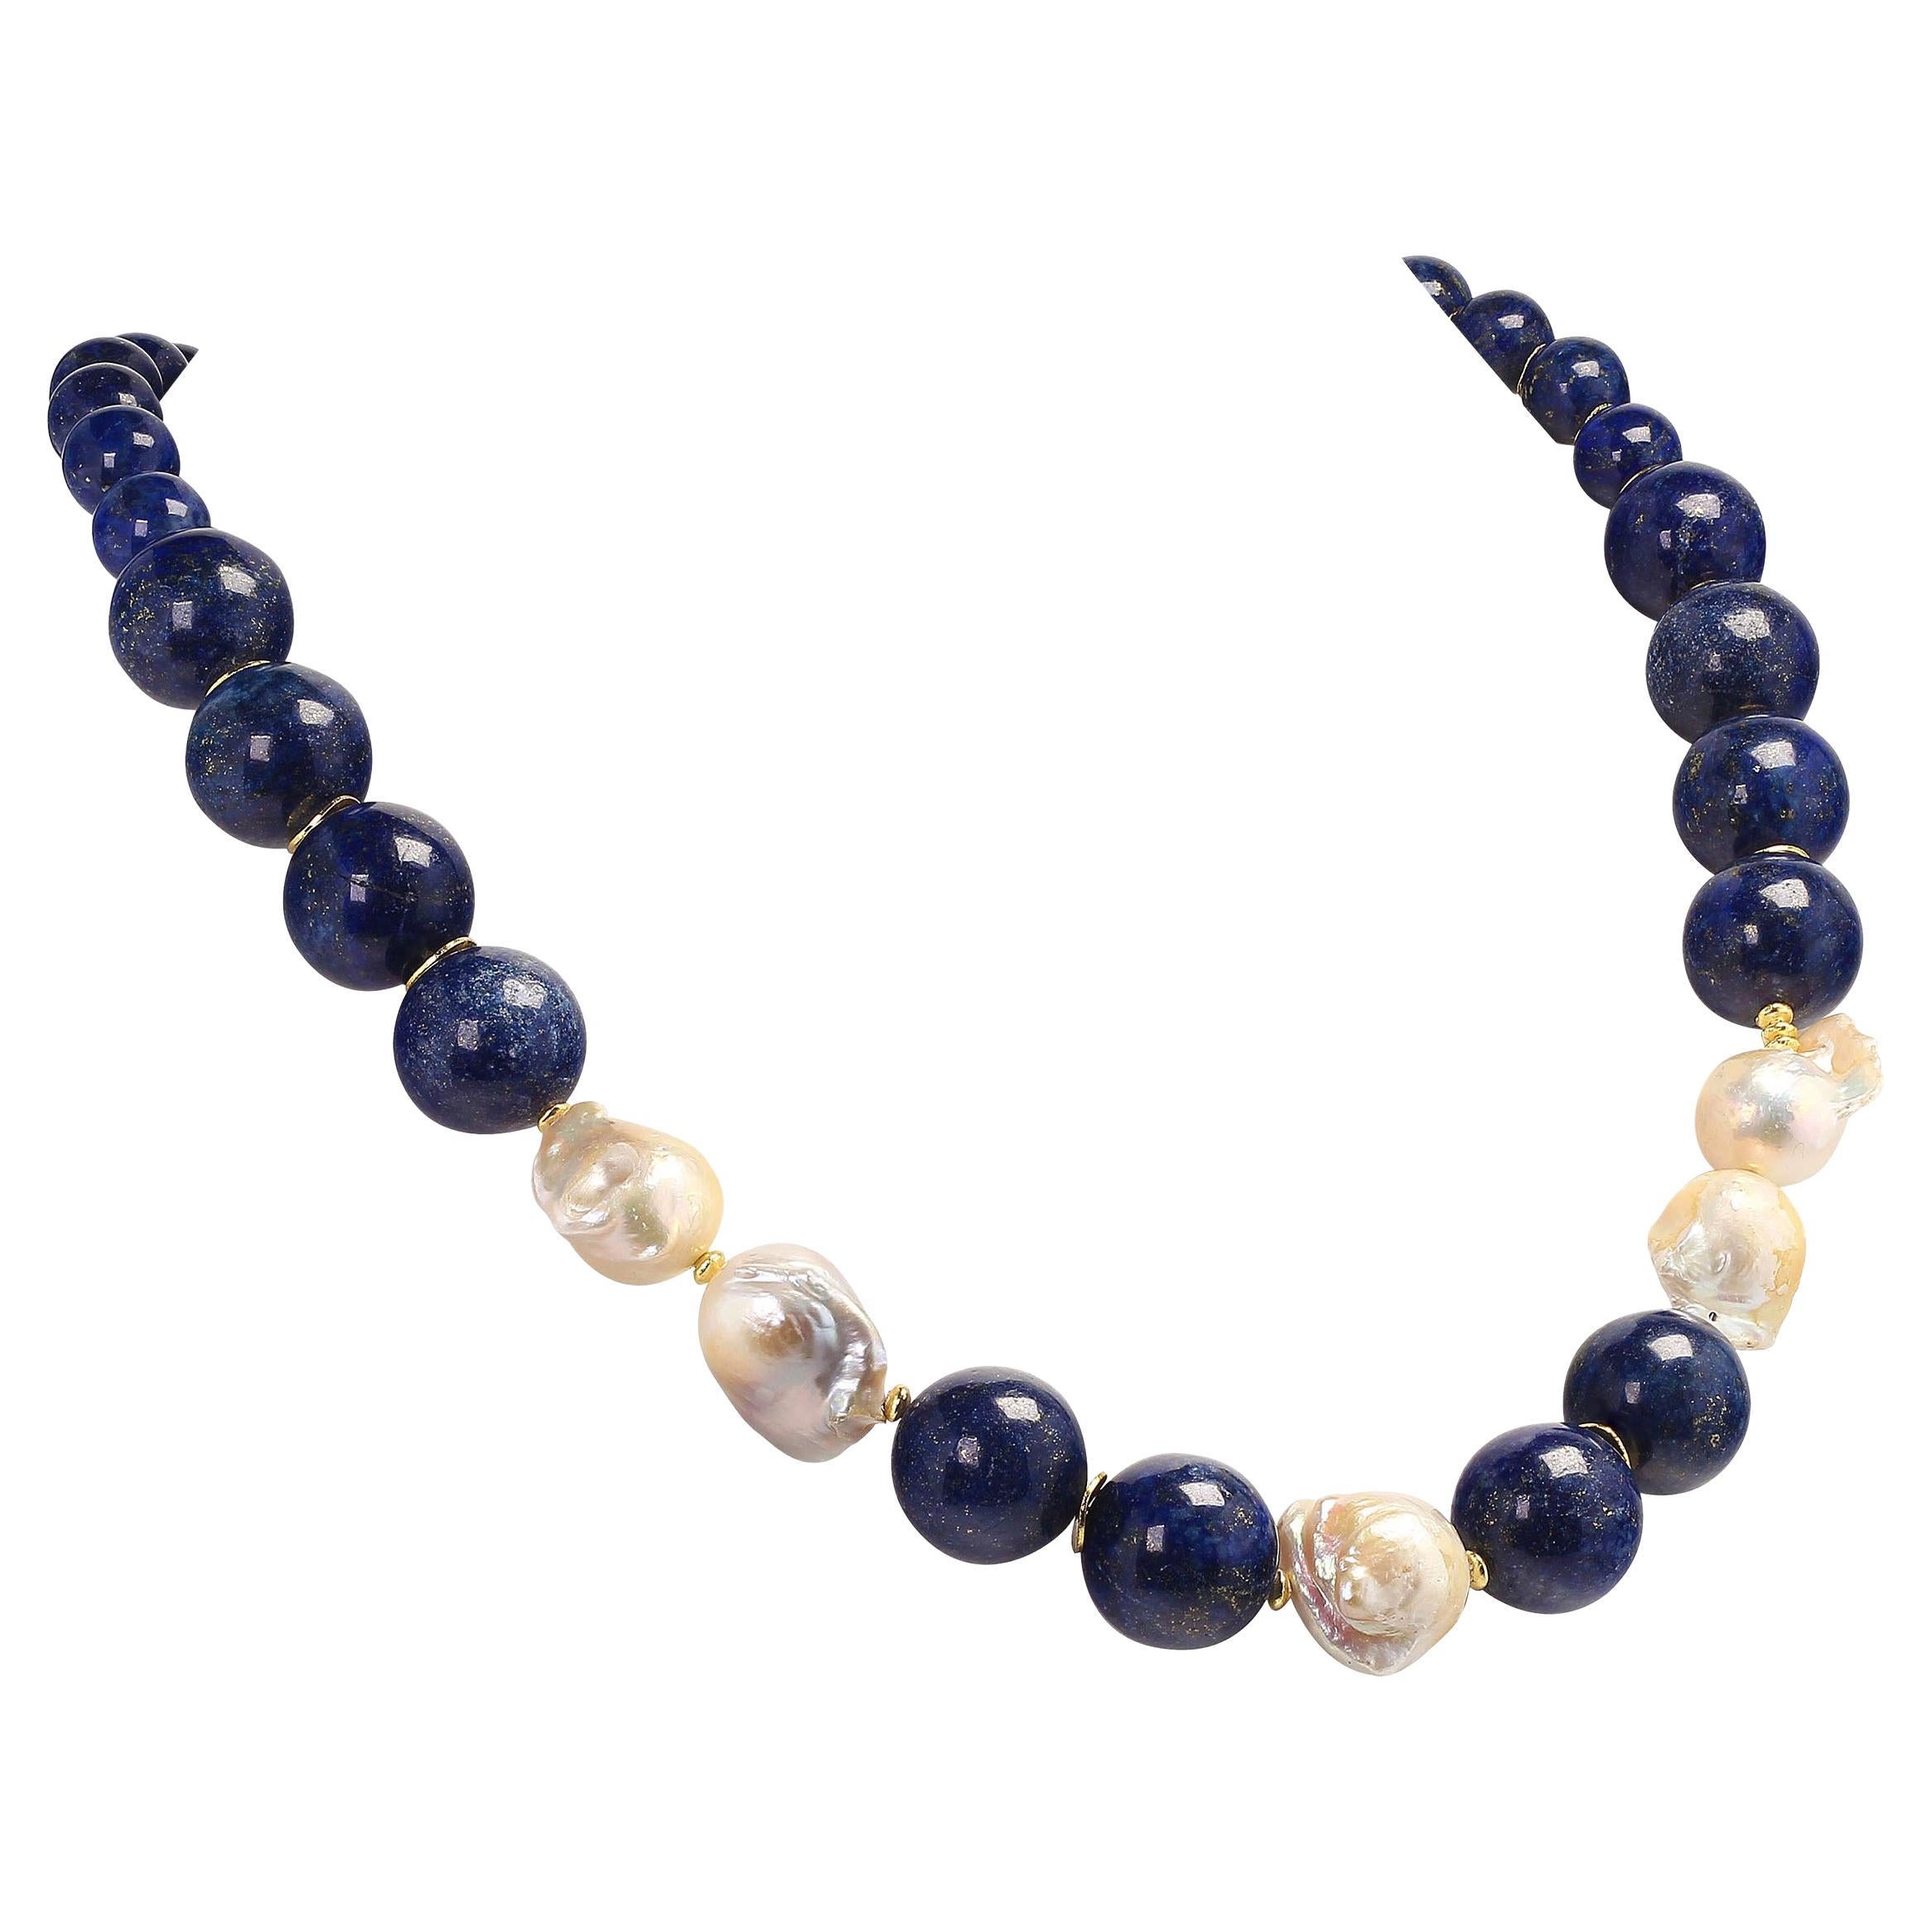 AJD 24 Inch Dramatic Blue Lapis Lazuli and White Baroque Pearl Necklace